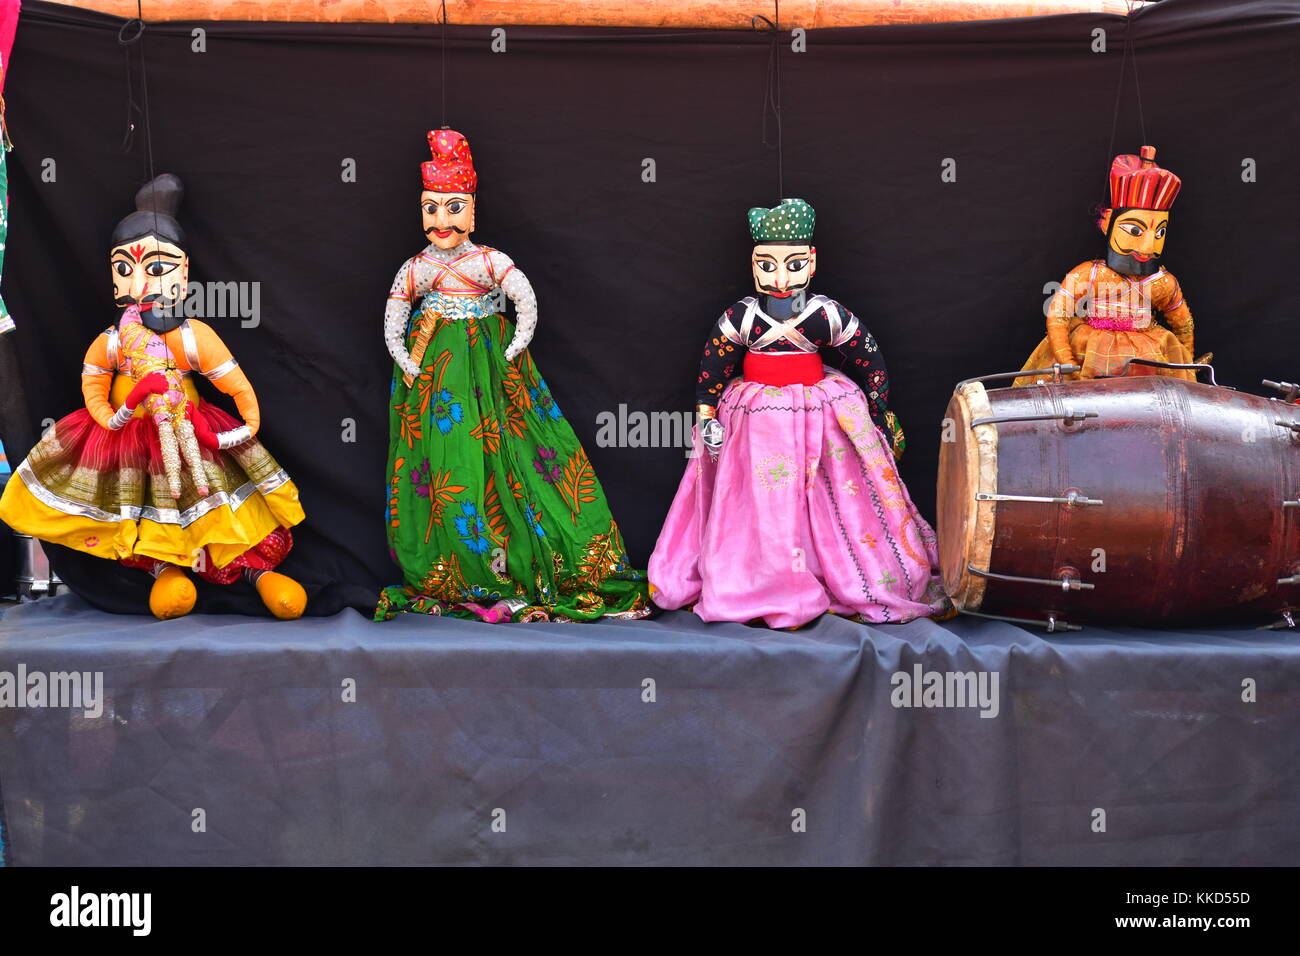 Four string puppets along with a traditional musical instrument called dholki on display at the National Crafts Mela, Kalagram, India. Stock Photo